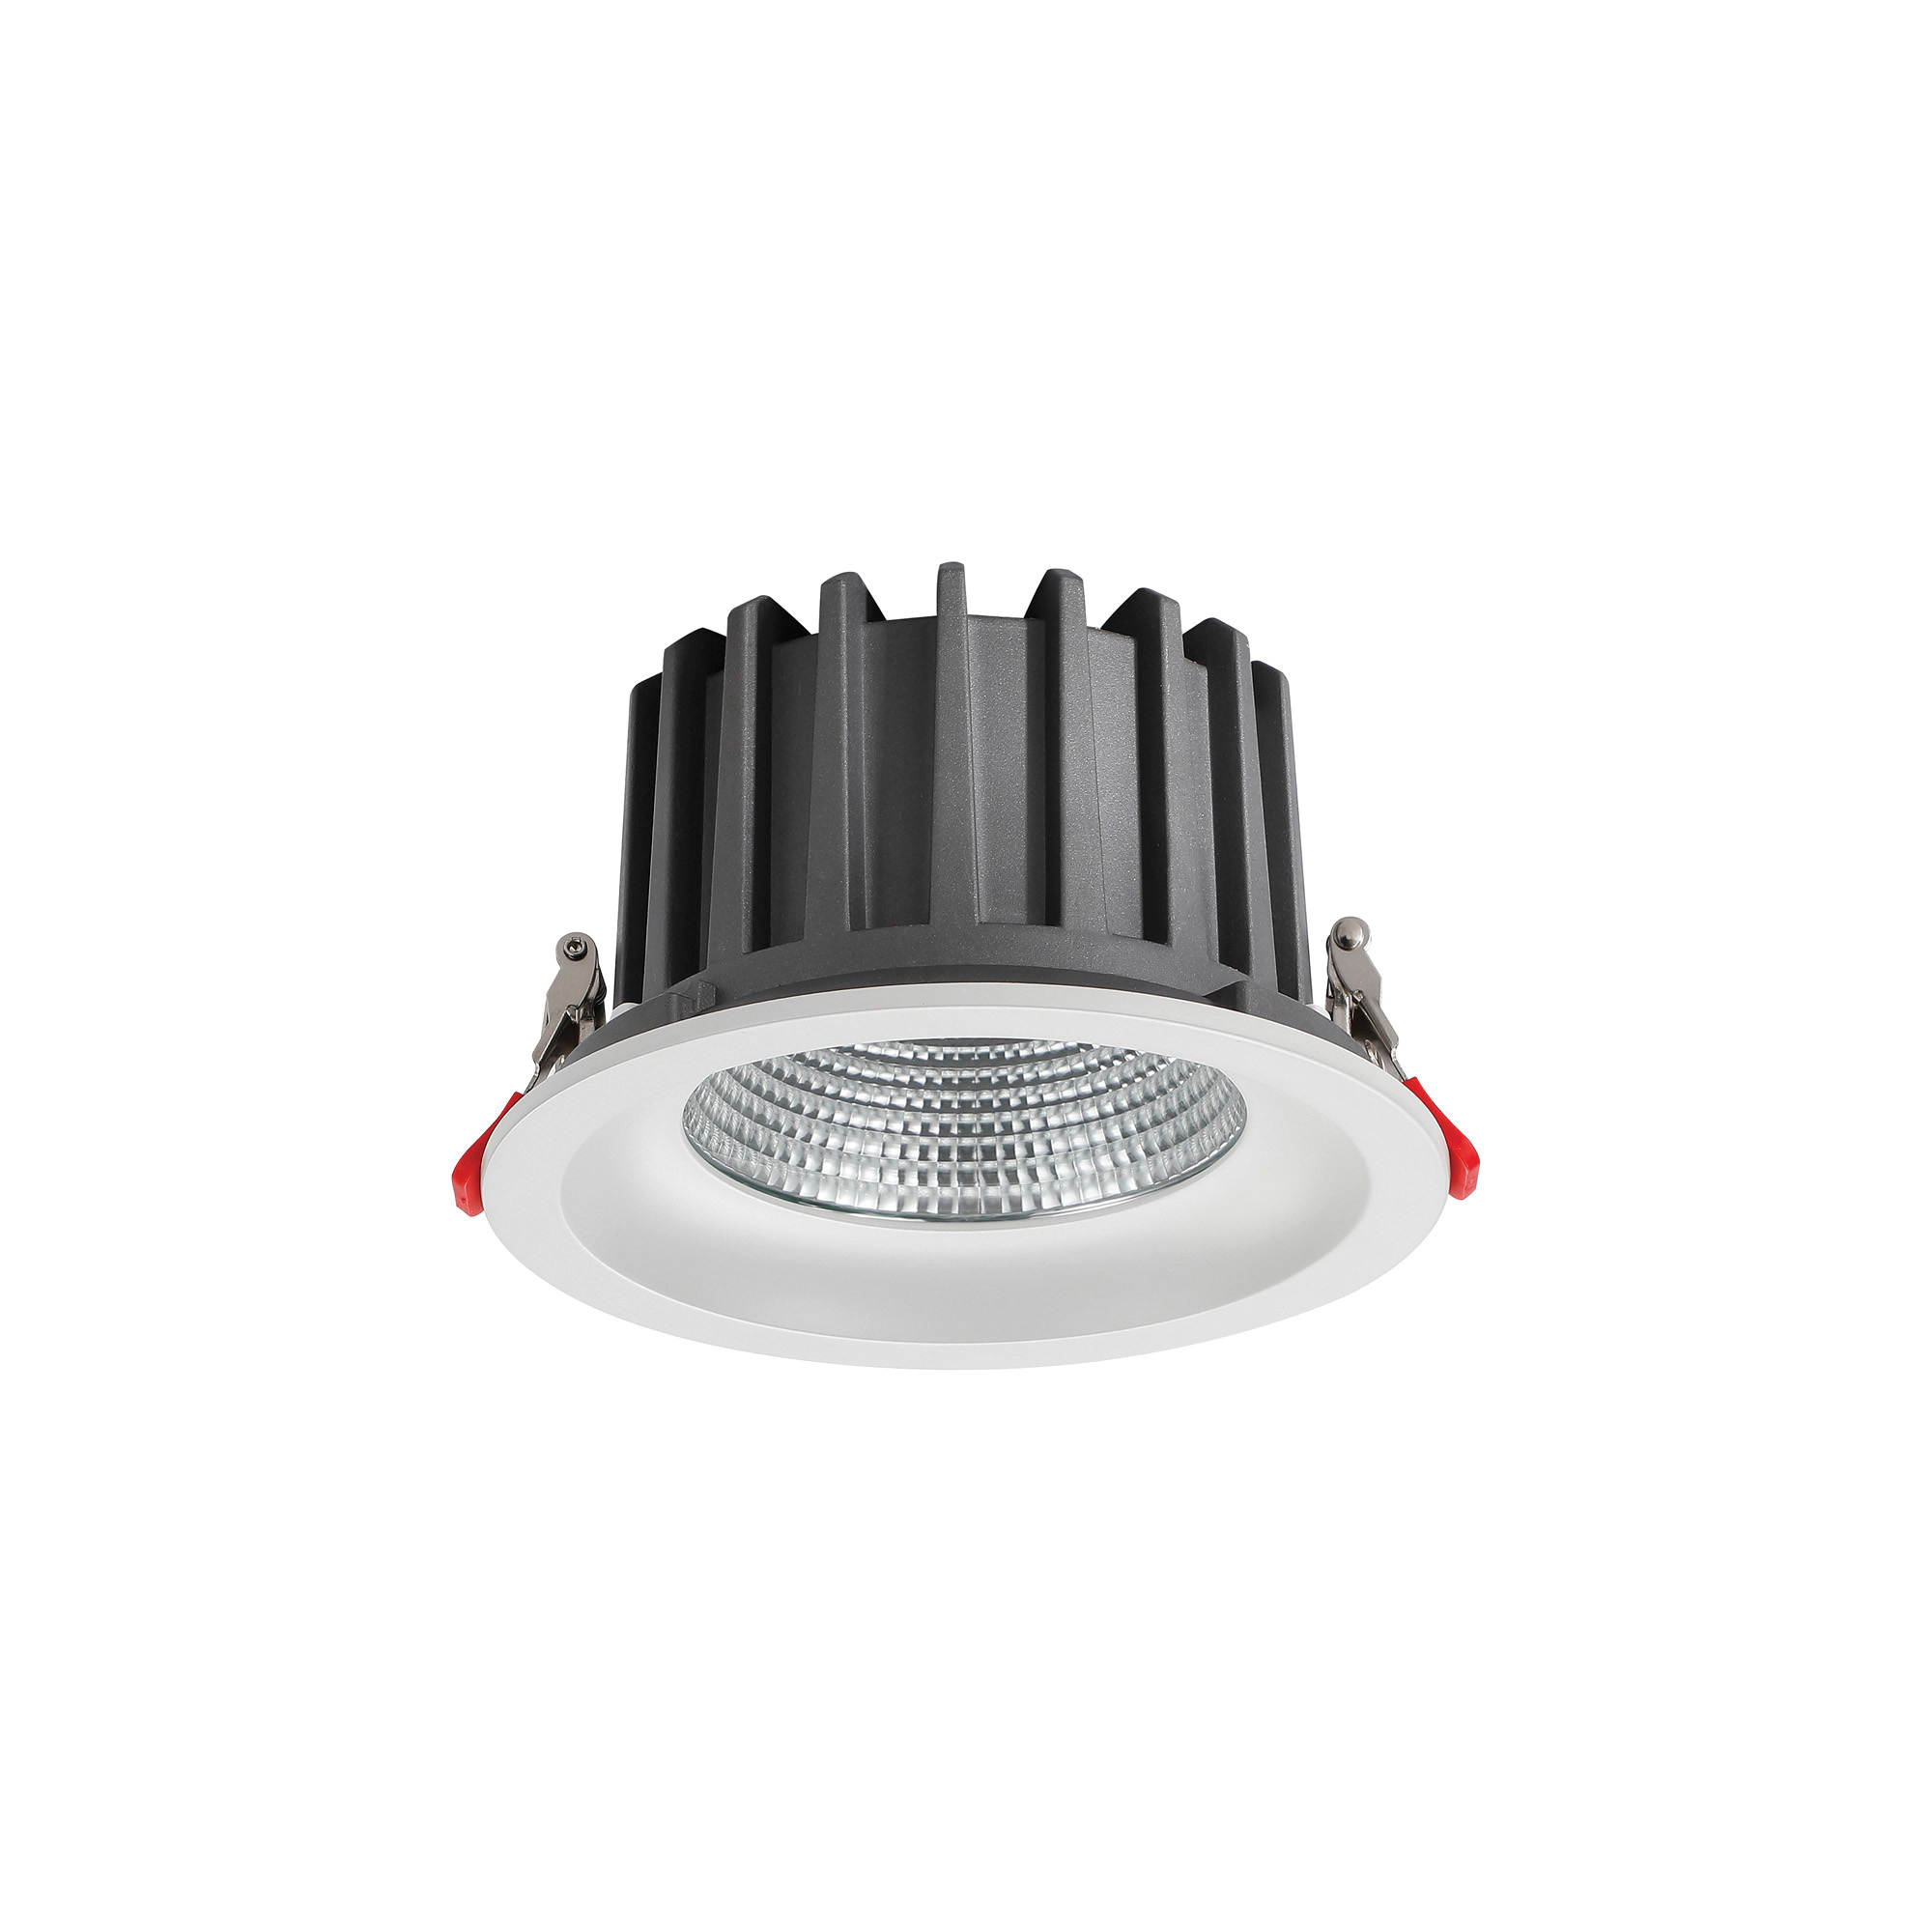 DL200063  Bionic 30; 30W; 700mA; White Deep Round Recessed Downlight; 2550lm ;Cut Out 155mm; 42° ; 5000K; IP44; DRIVER INC.; 5yrs Warranty.